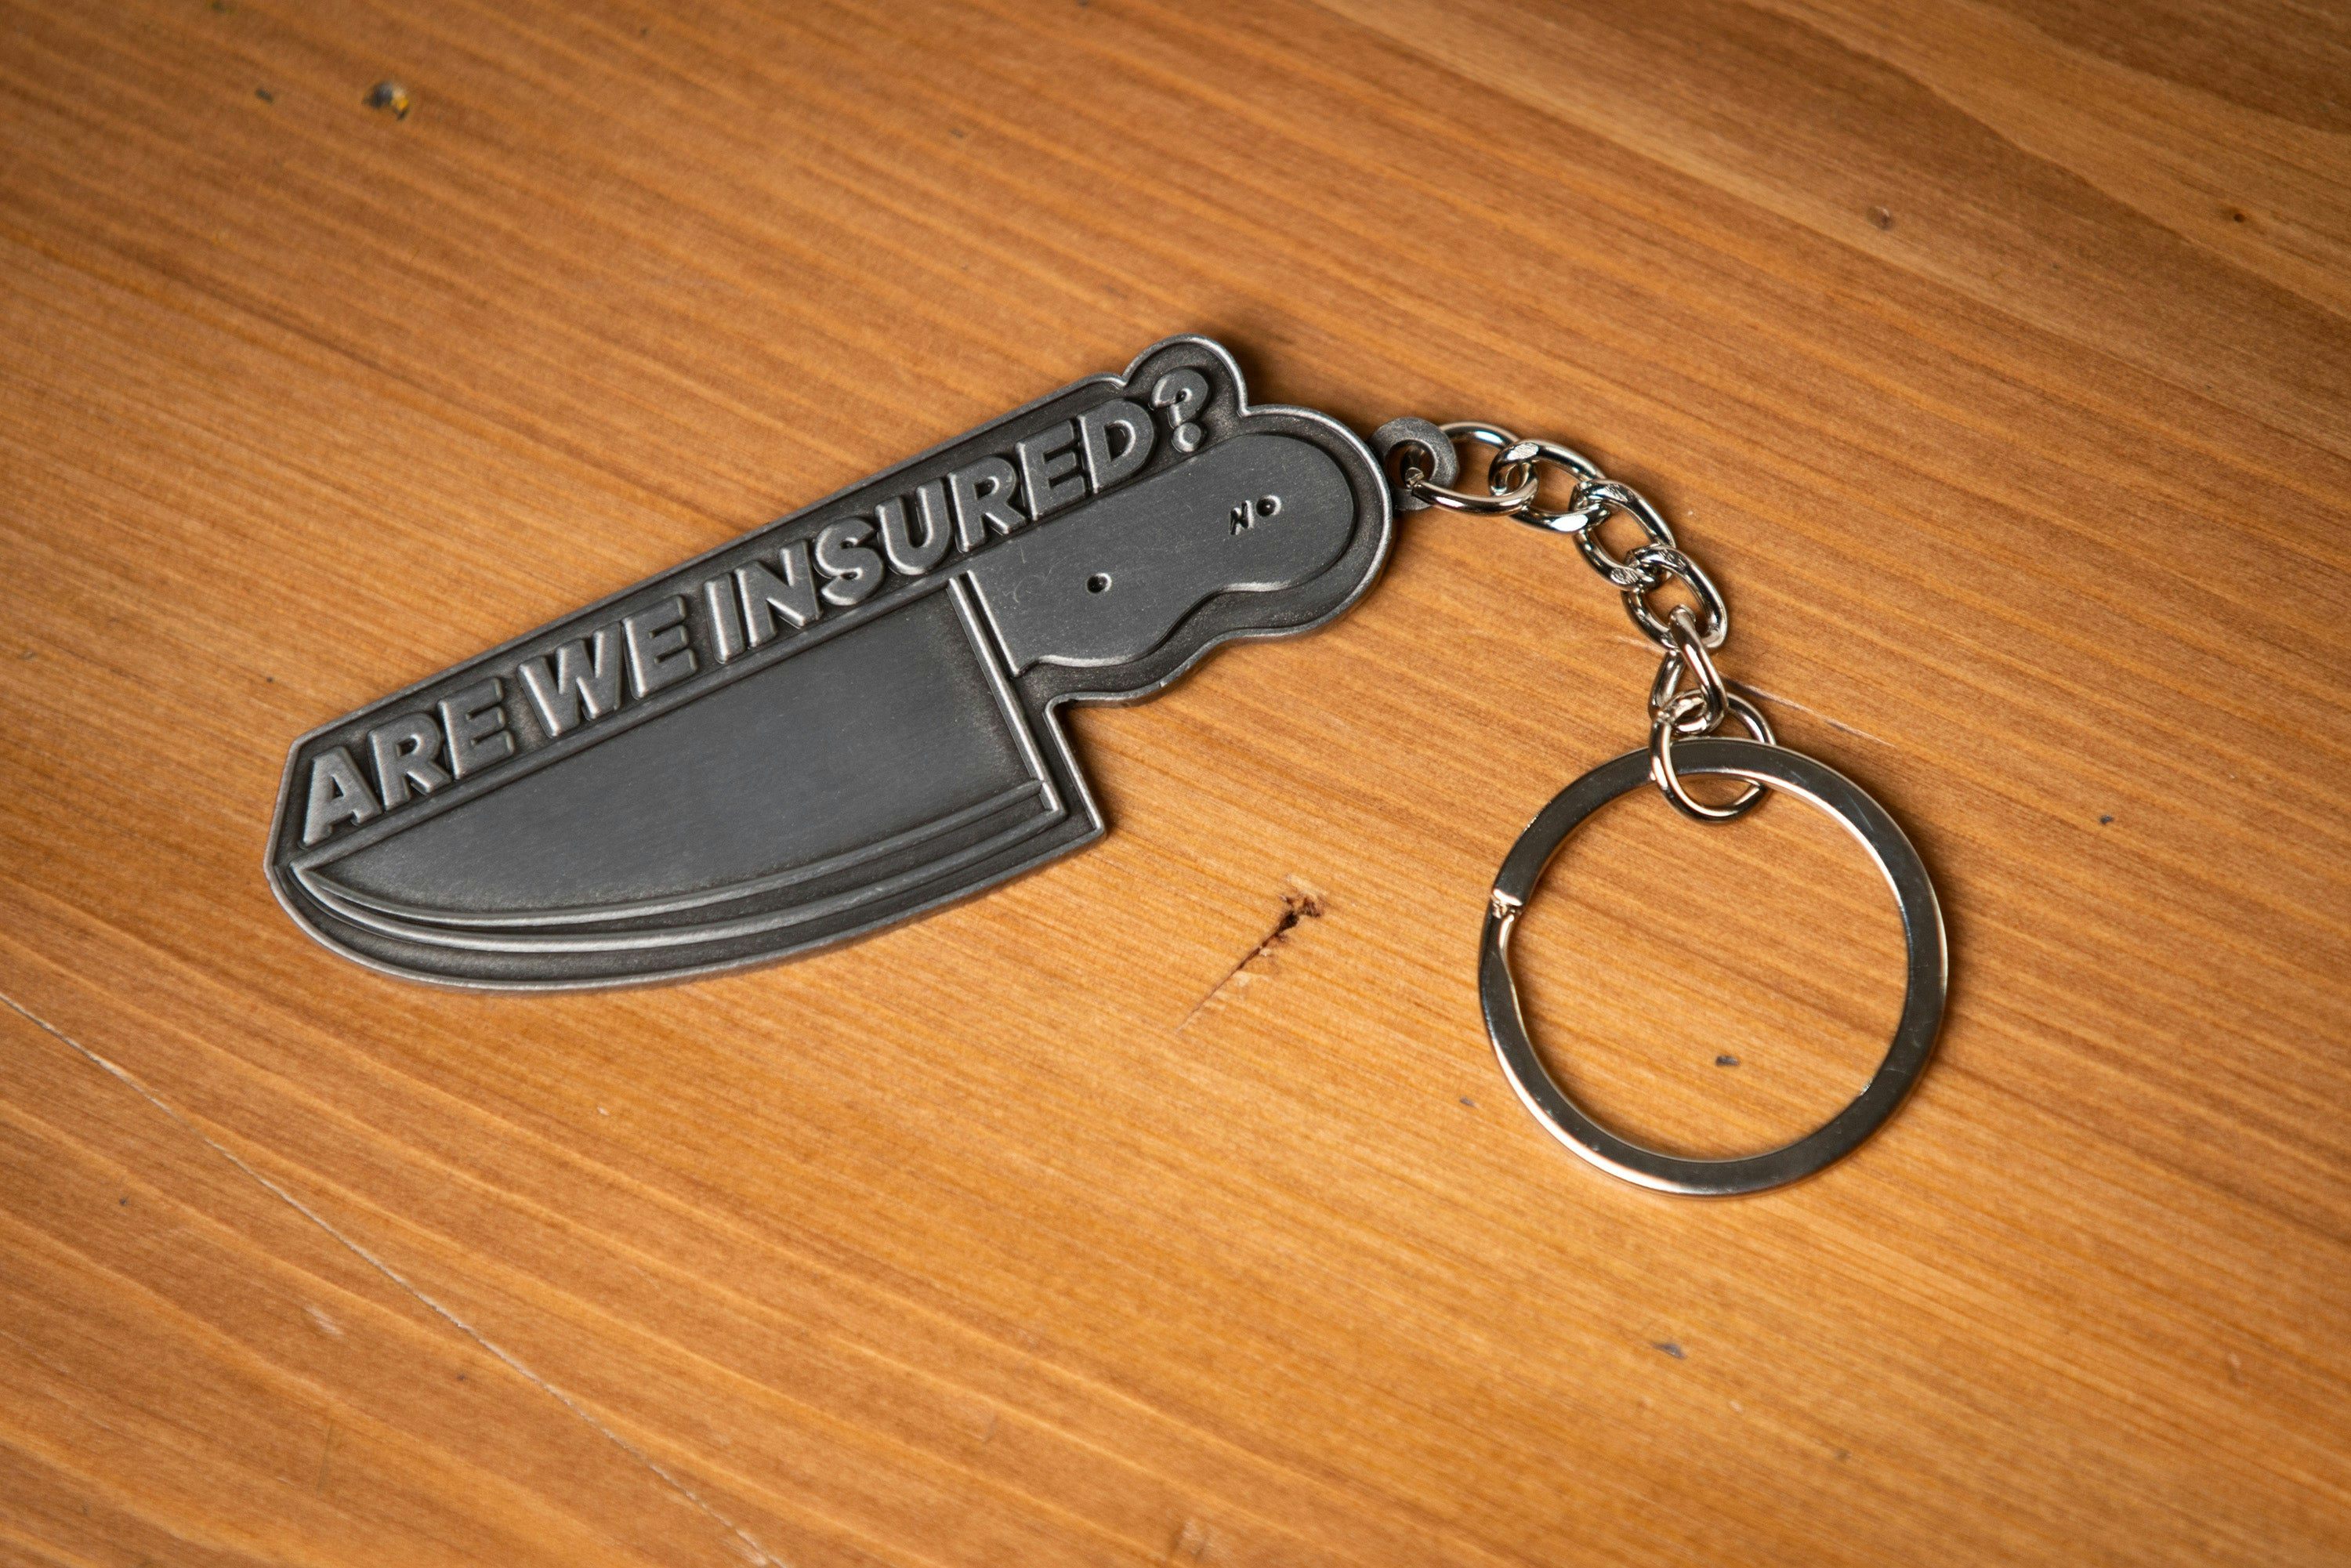 The Ten Minute Power Hour - "Are We Insured?" Metal Keychain